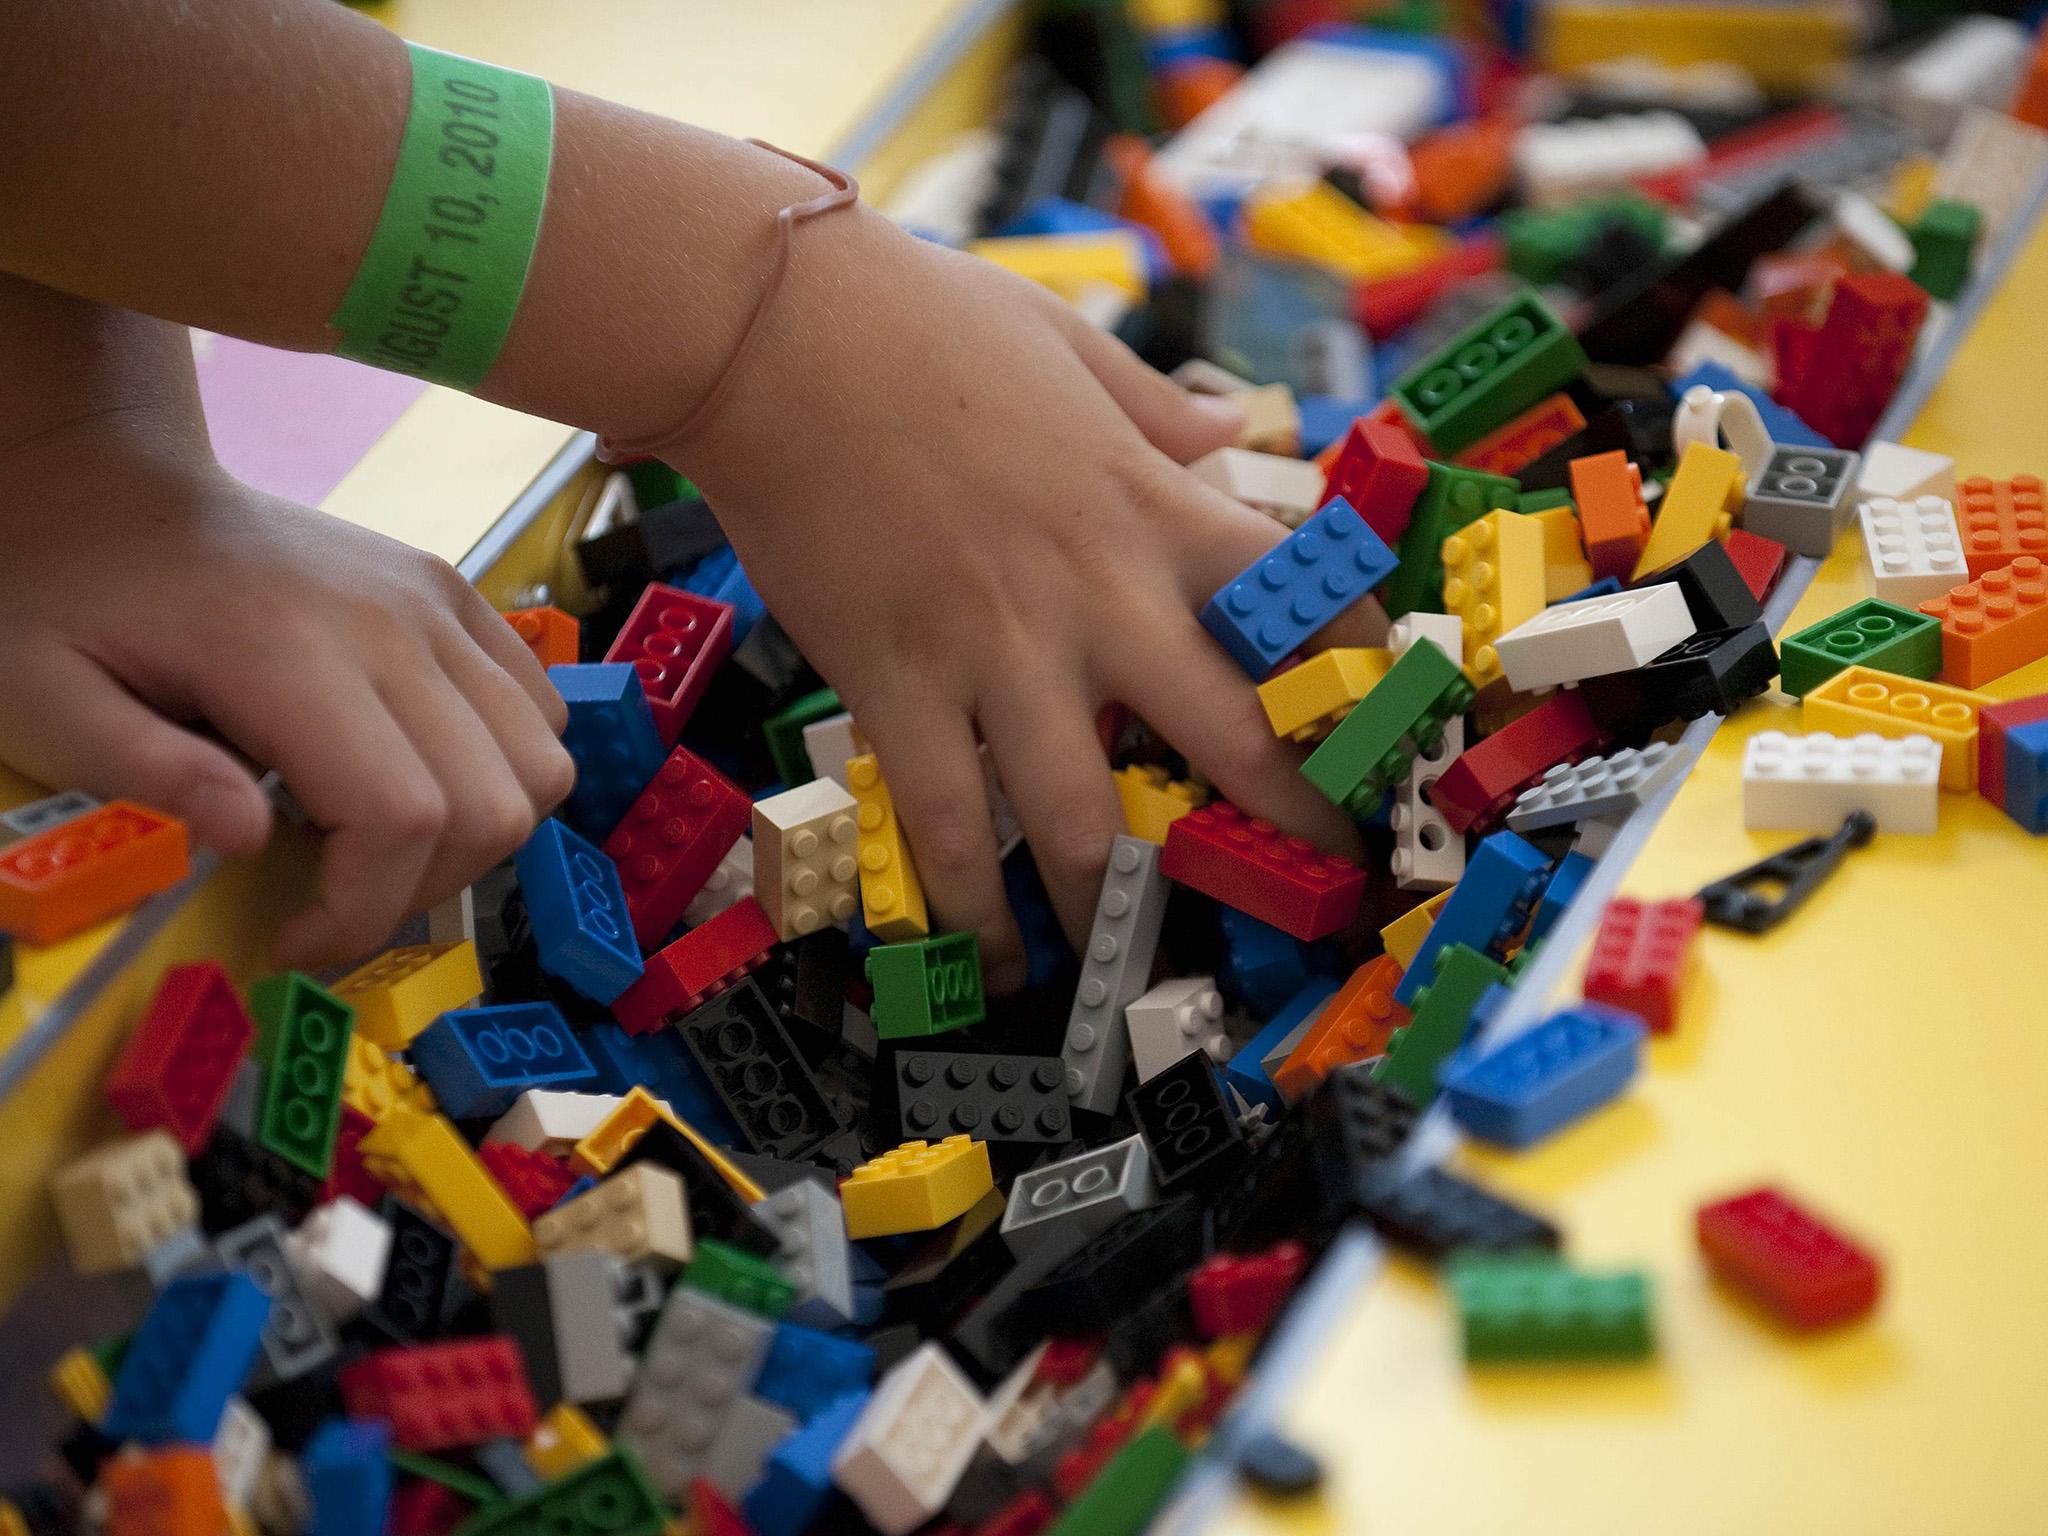 Prices of Lego sets could increase starting from January 1 next year,